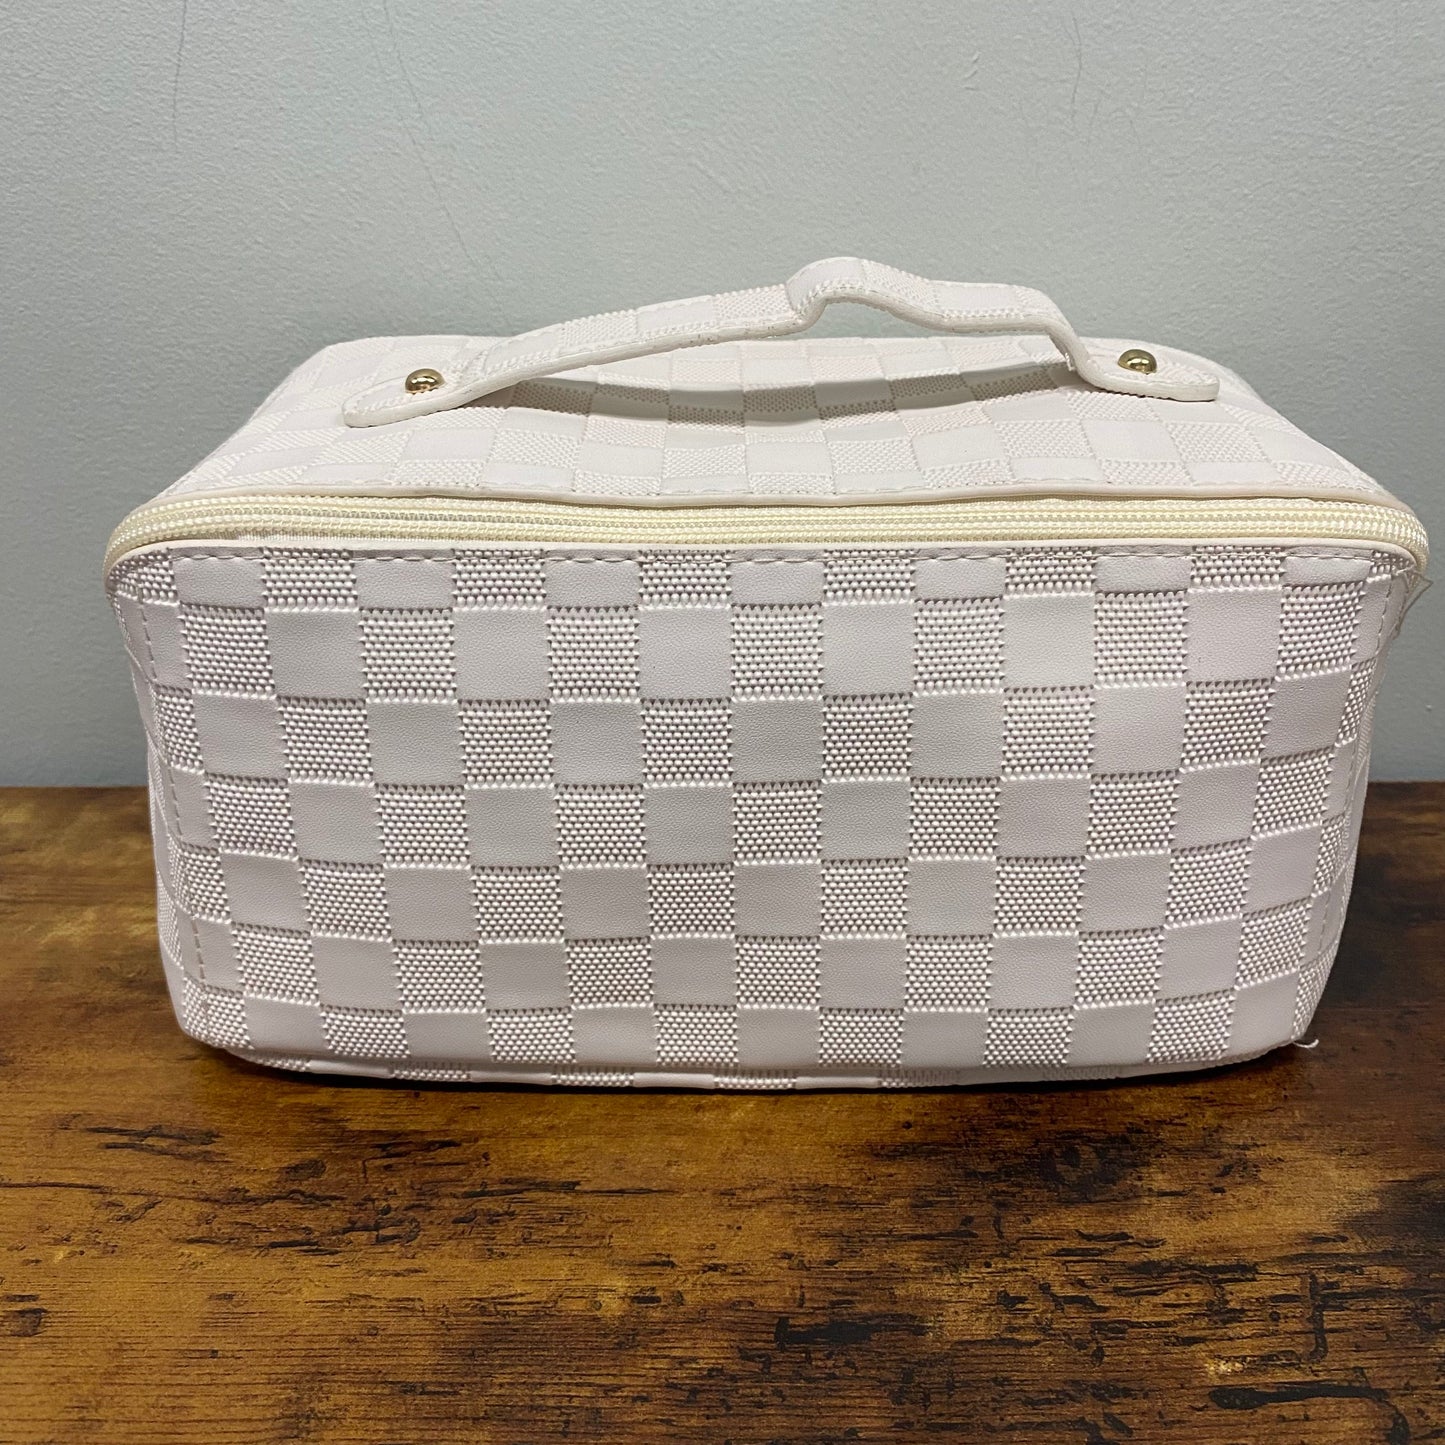 Oversized Lay Flat Cosmetic Bag - Checkered